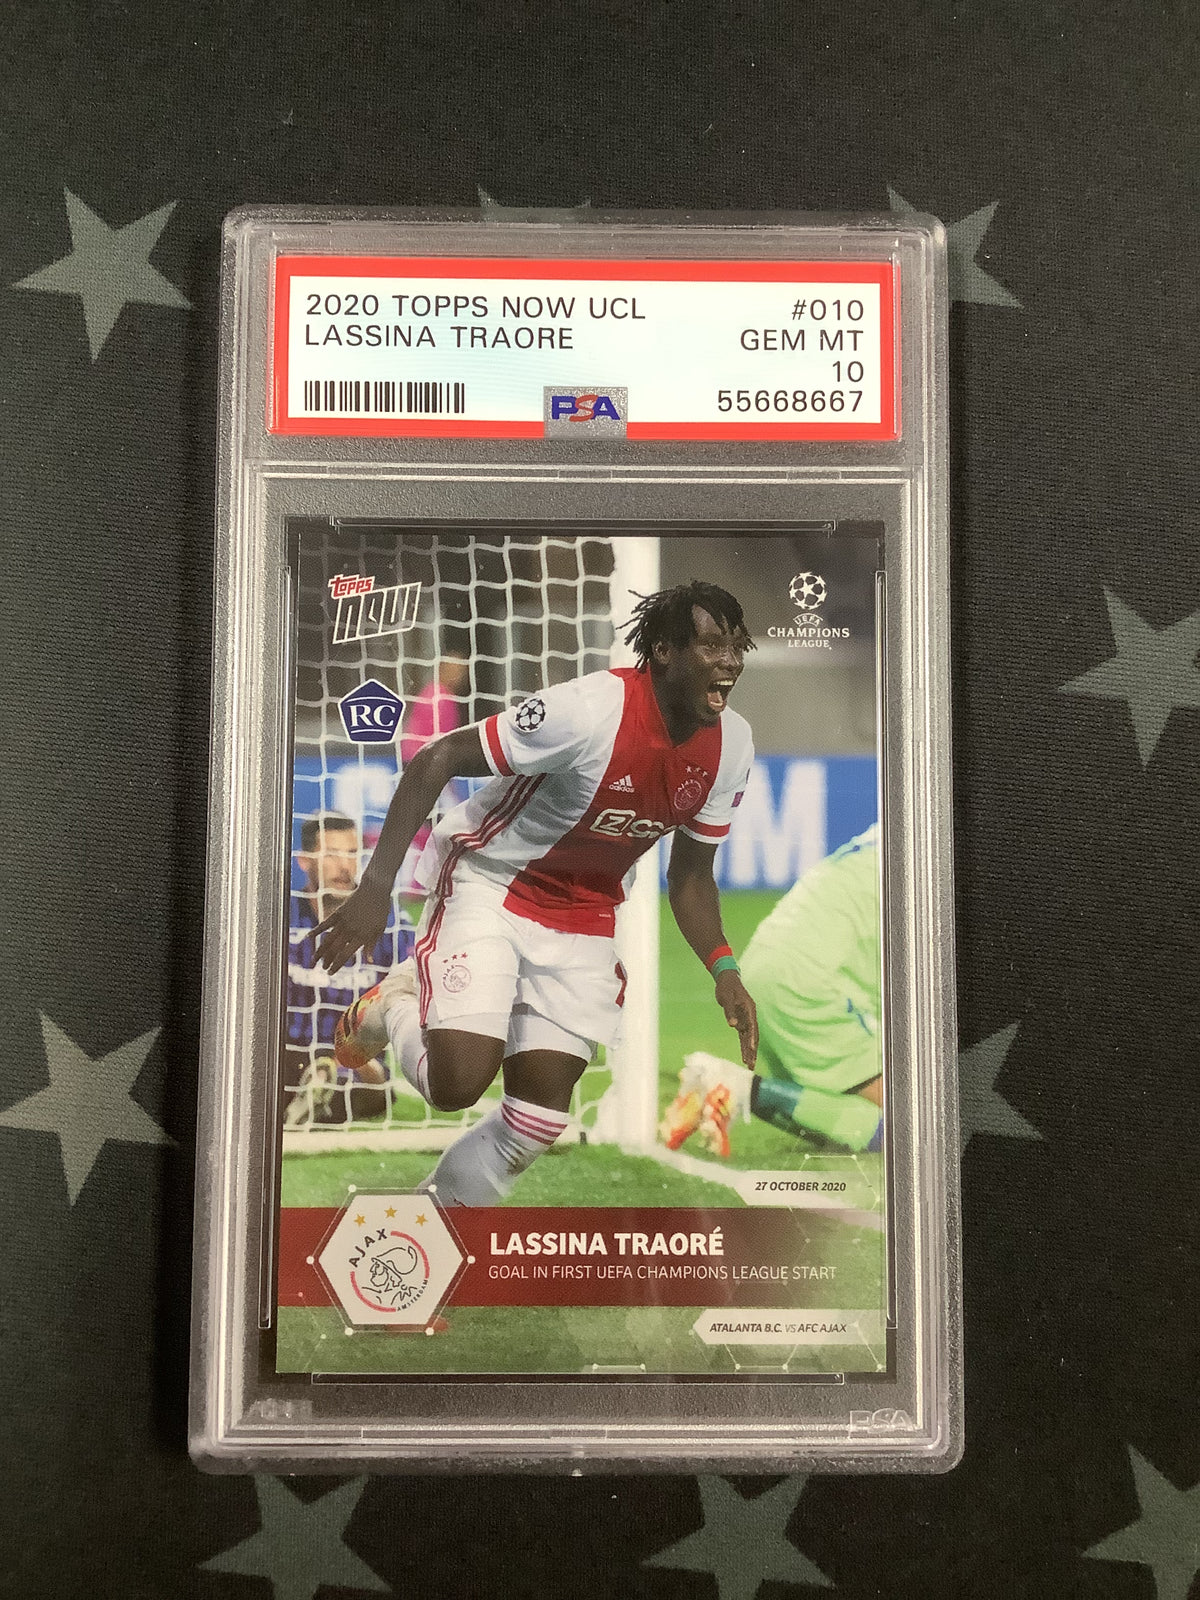 2020 TOPPS NOW UCL LASSINA TRAORE #010 GEM MT 10 55668667